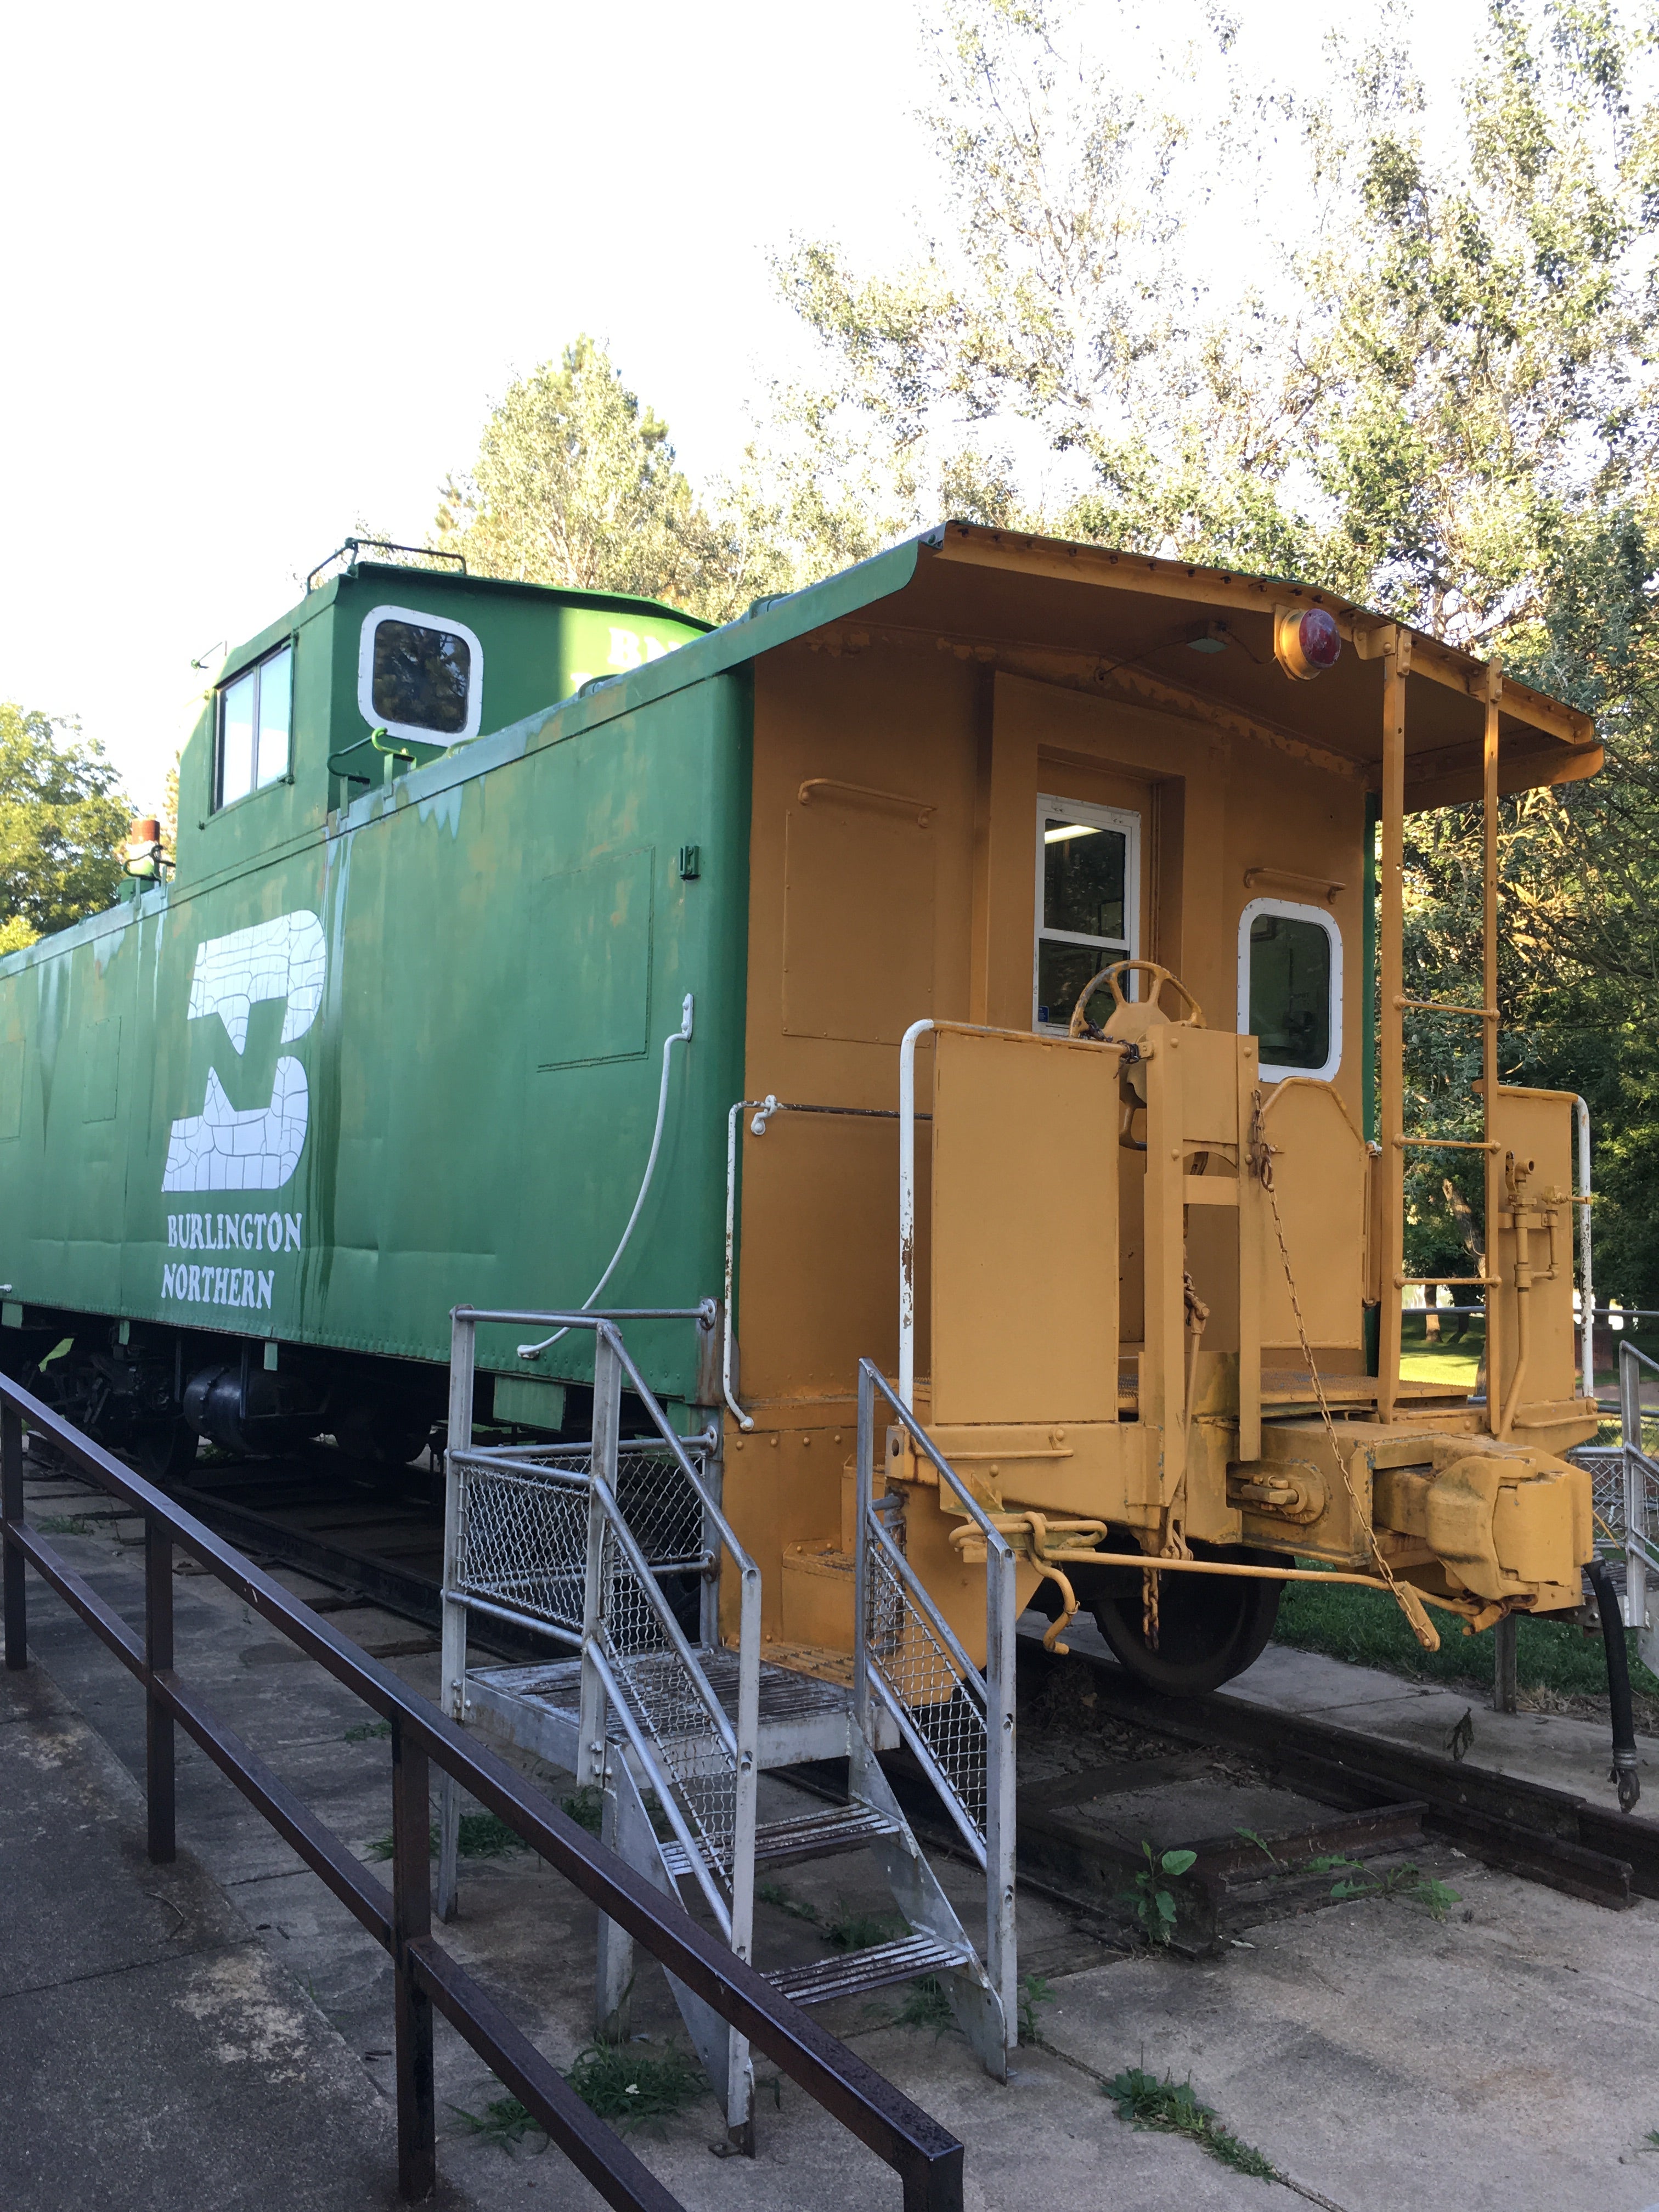 Cool caboose to explore